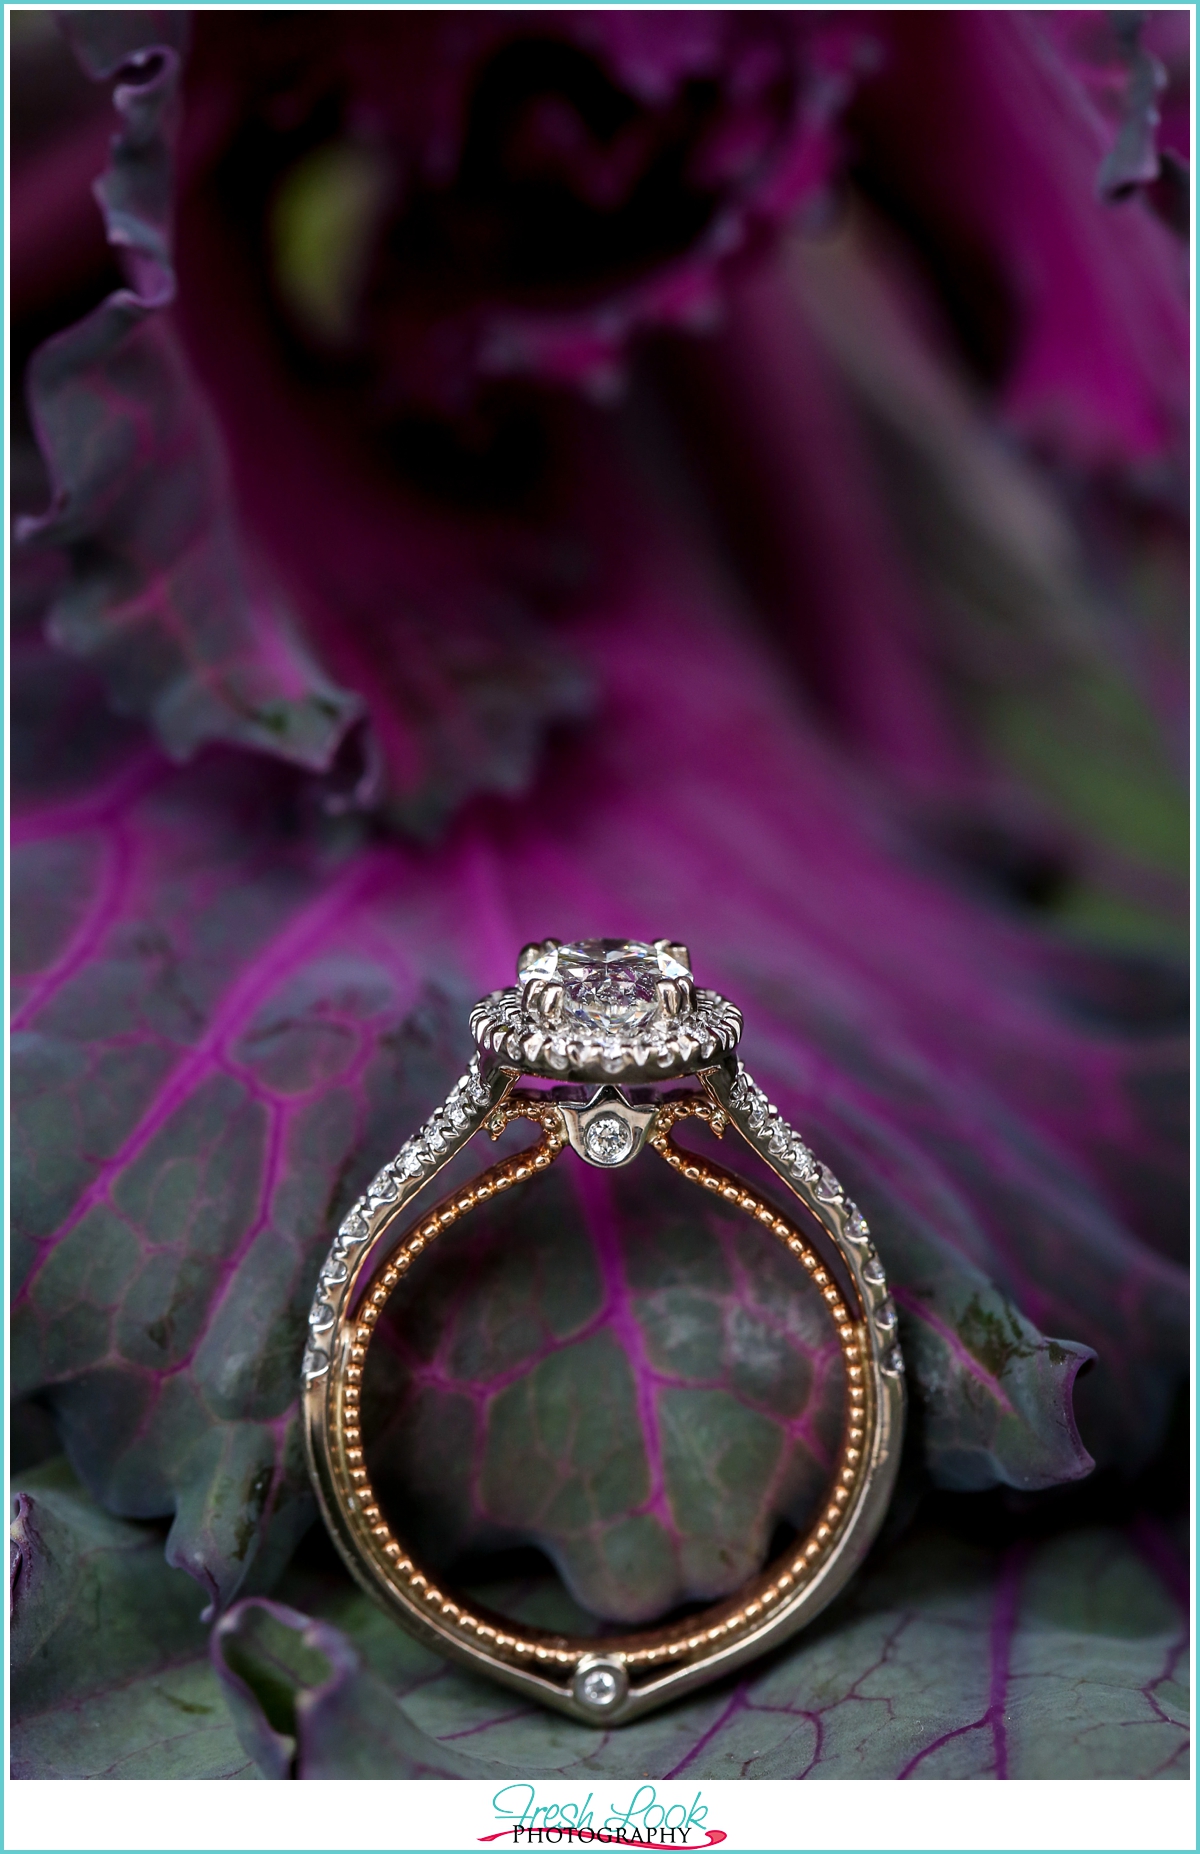 Do you guys think this looks costume? : r/EngagementRings